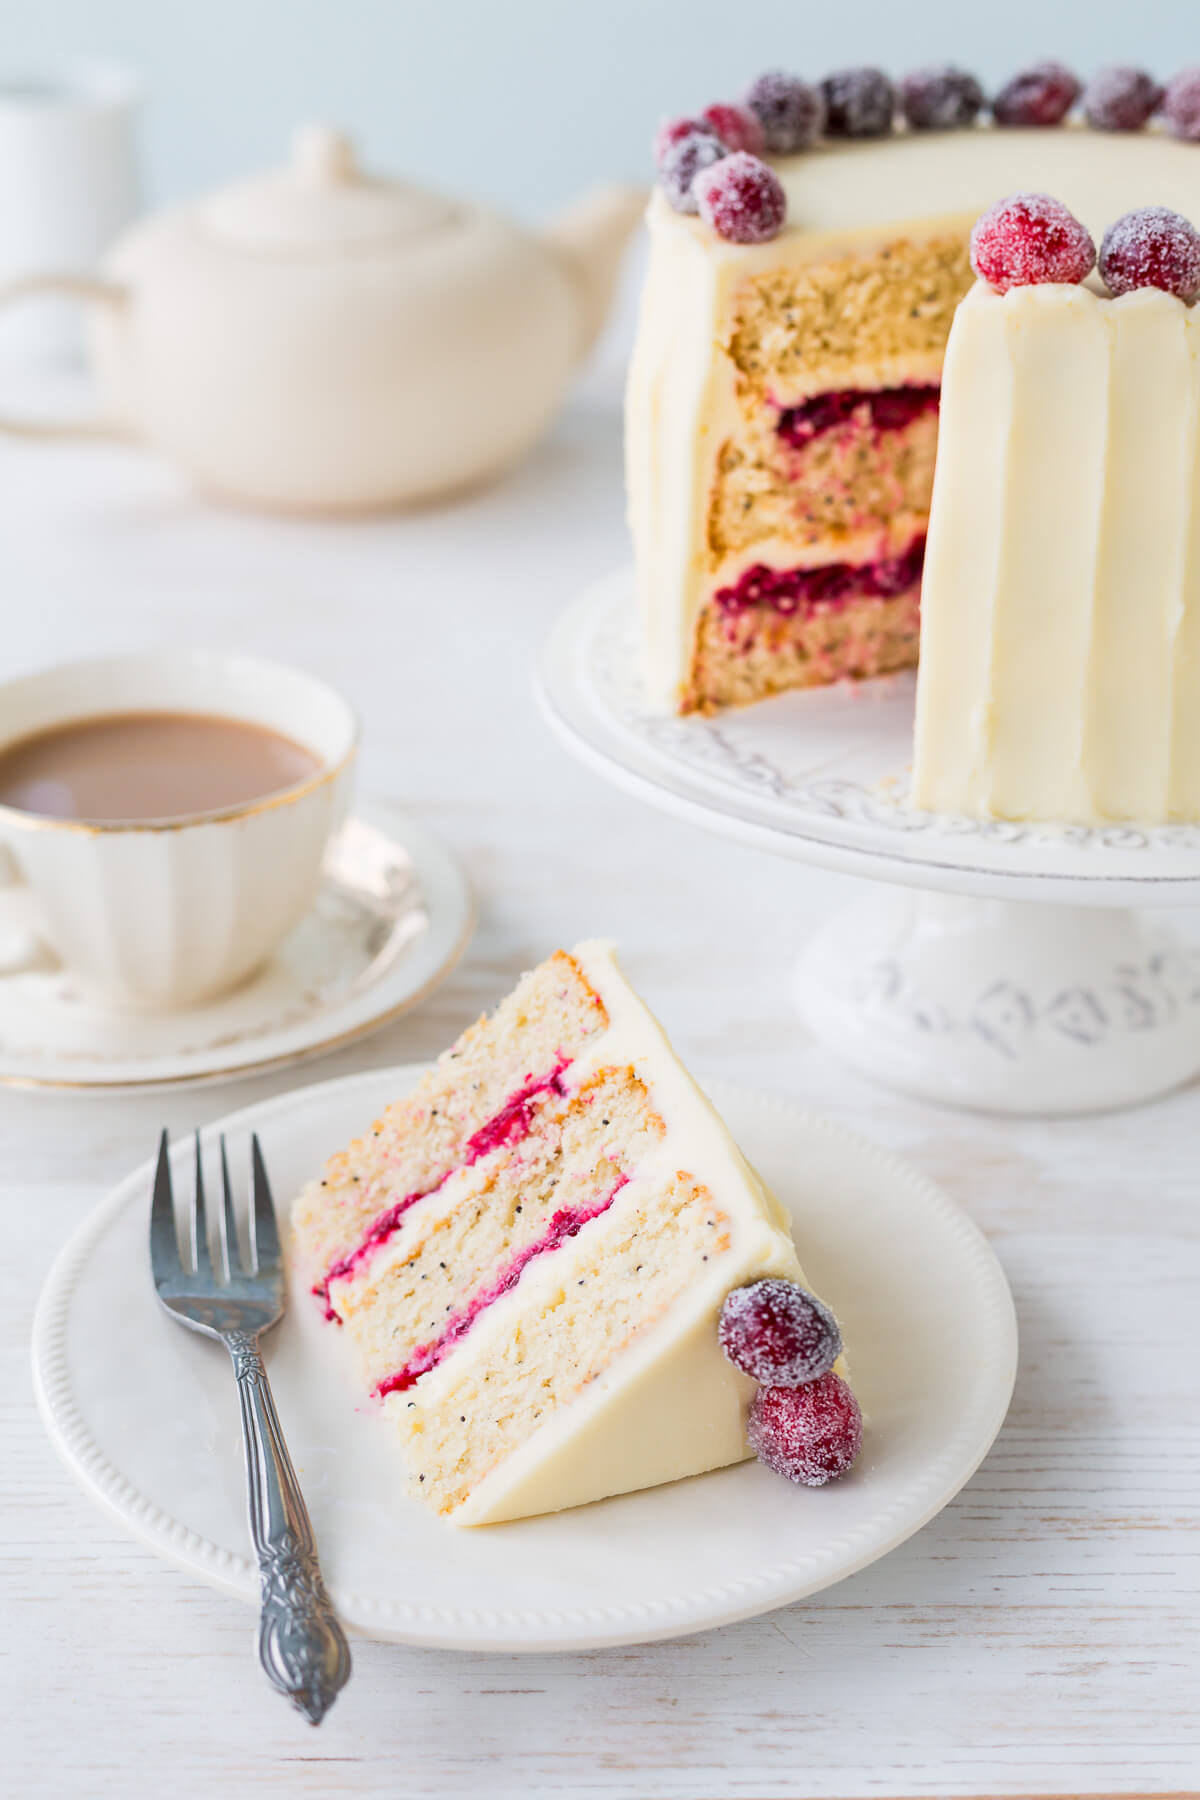 A slice of cranberry white chocolate cake served on a dessert plate with the layer cake in the background.